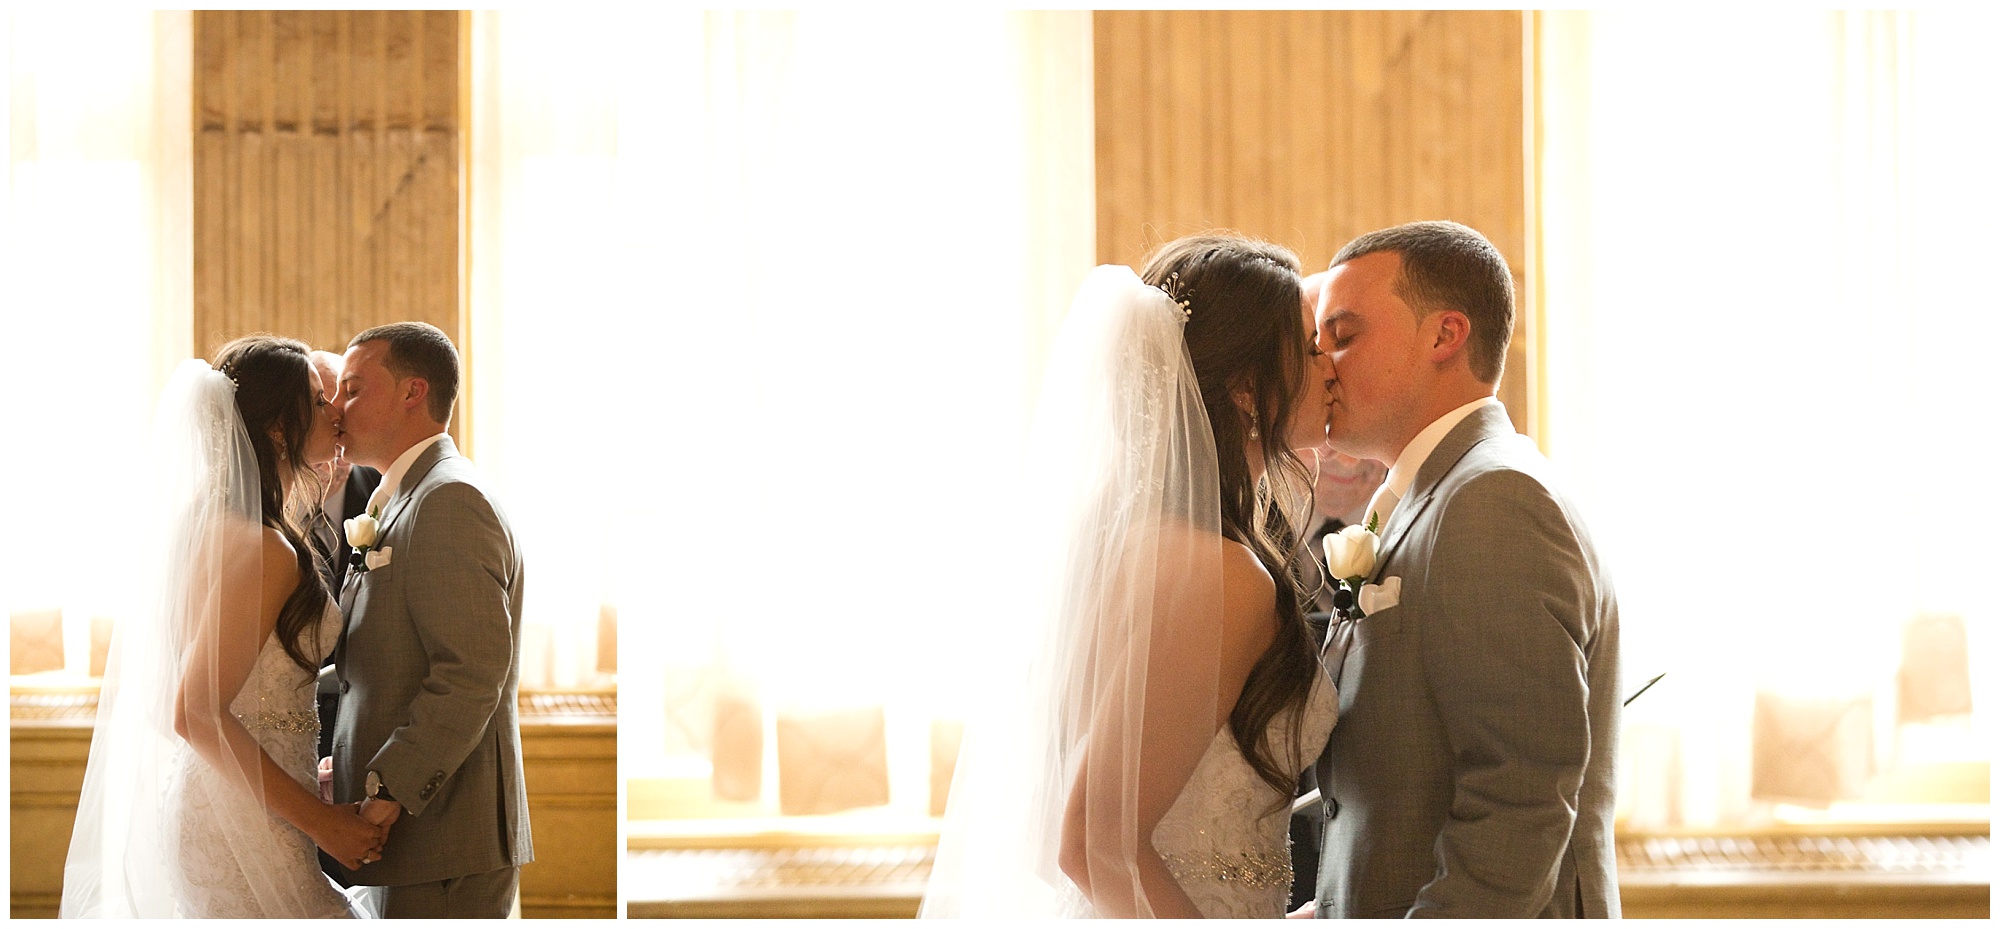 Photo of a bride and groom's first kiss at their ceremony.